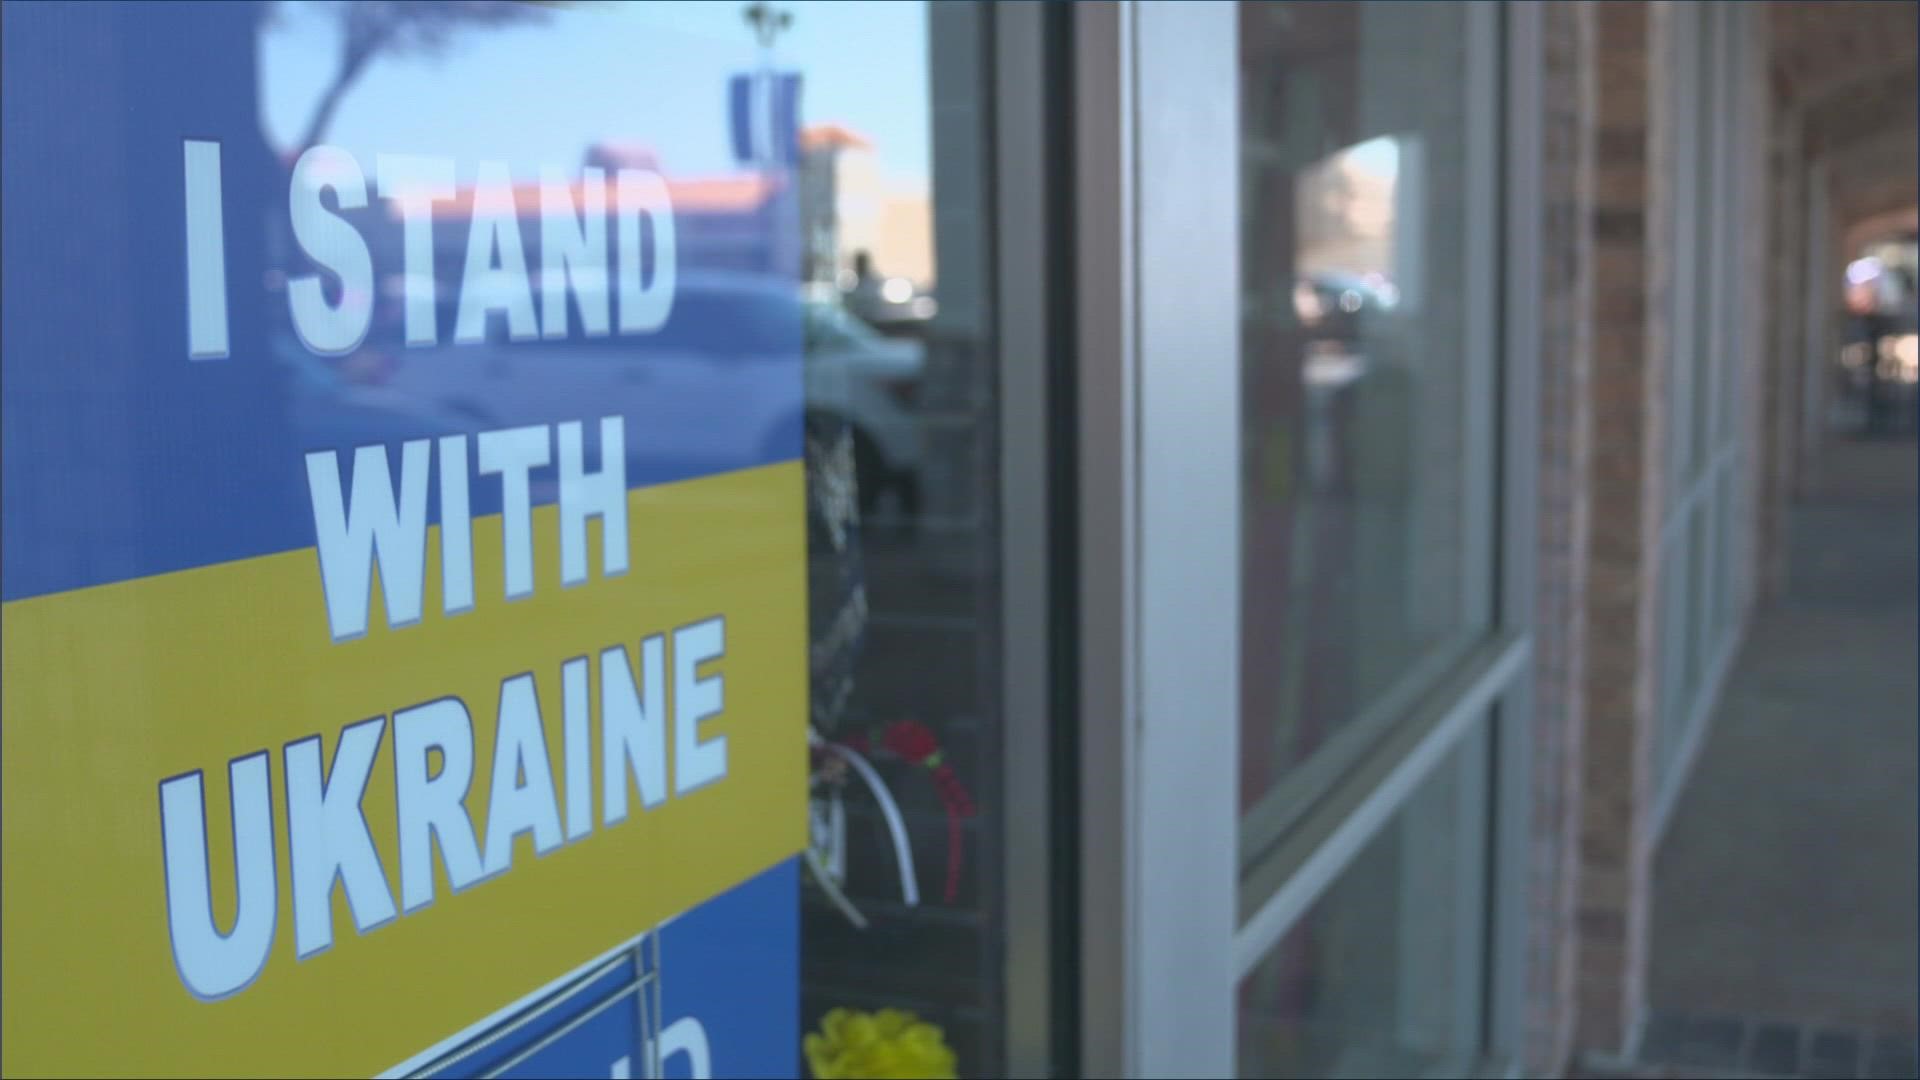 The CEO of Refugee Services of Texas told WFAA an estimated 12,000 Ukrainian refugees will resettle throughout Texas.